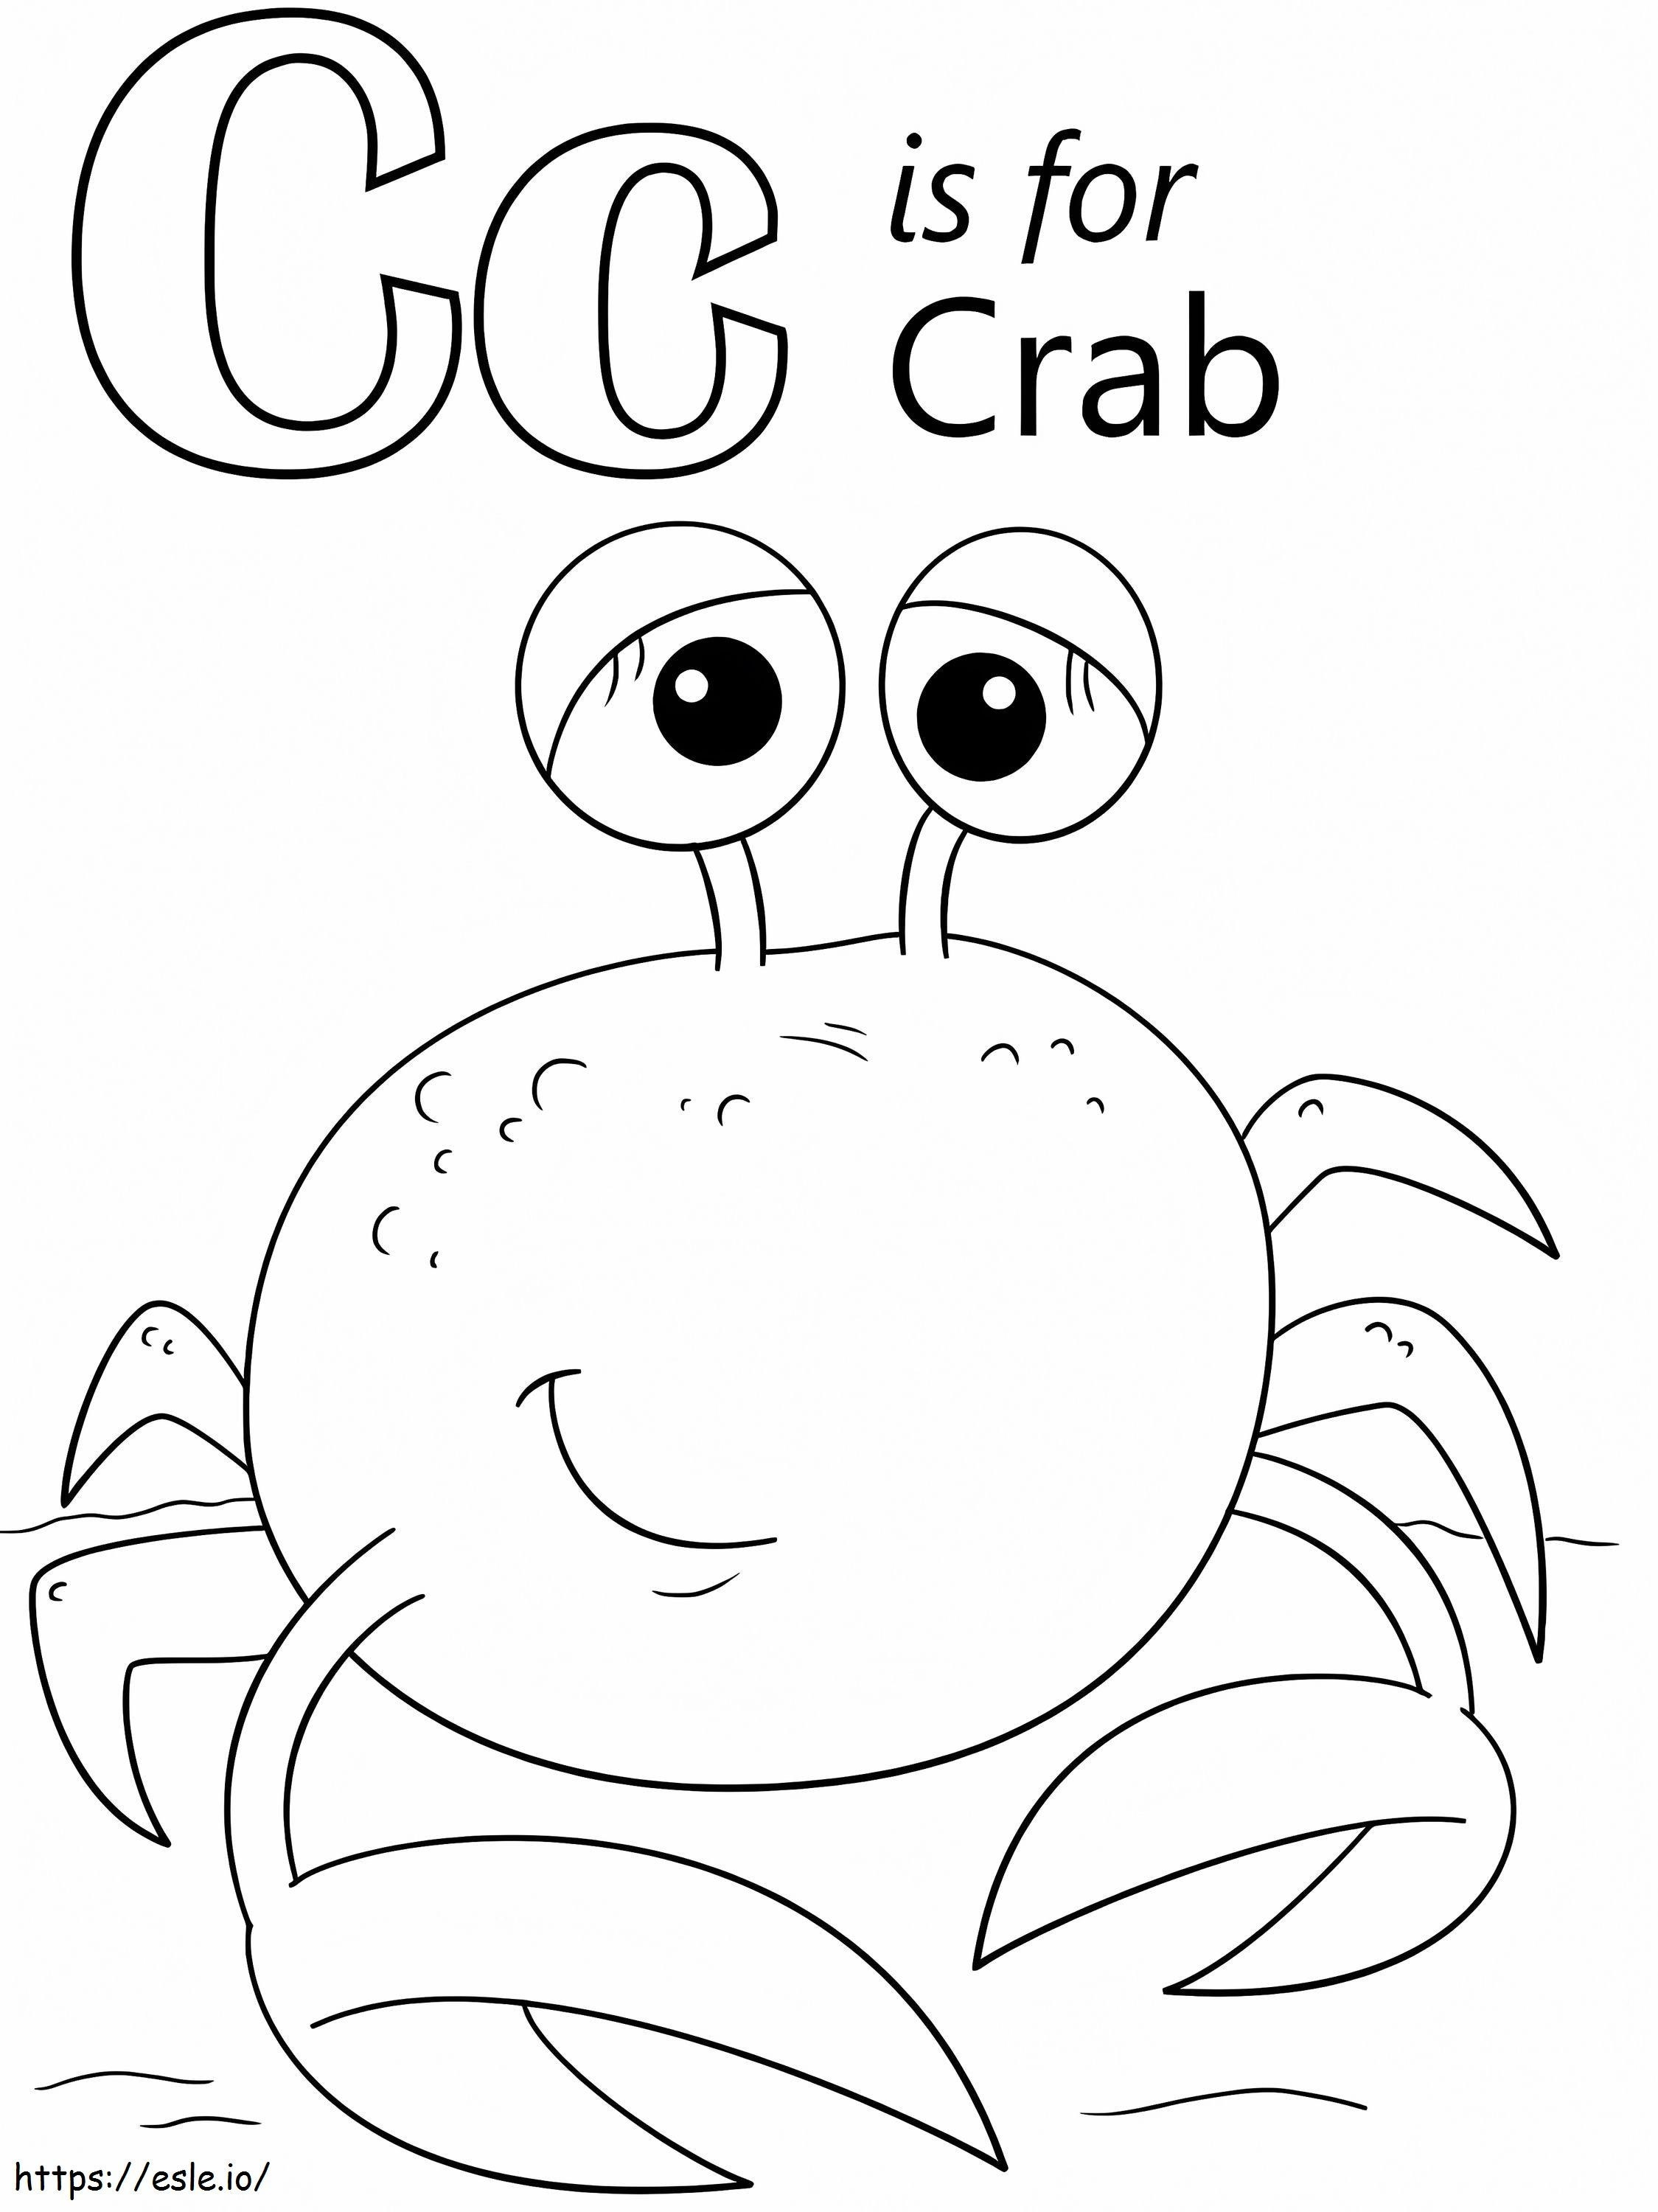 Crab Letter C coloring page